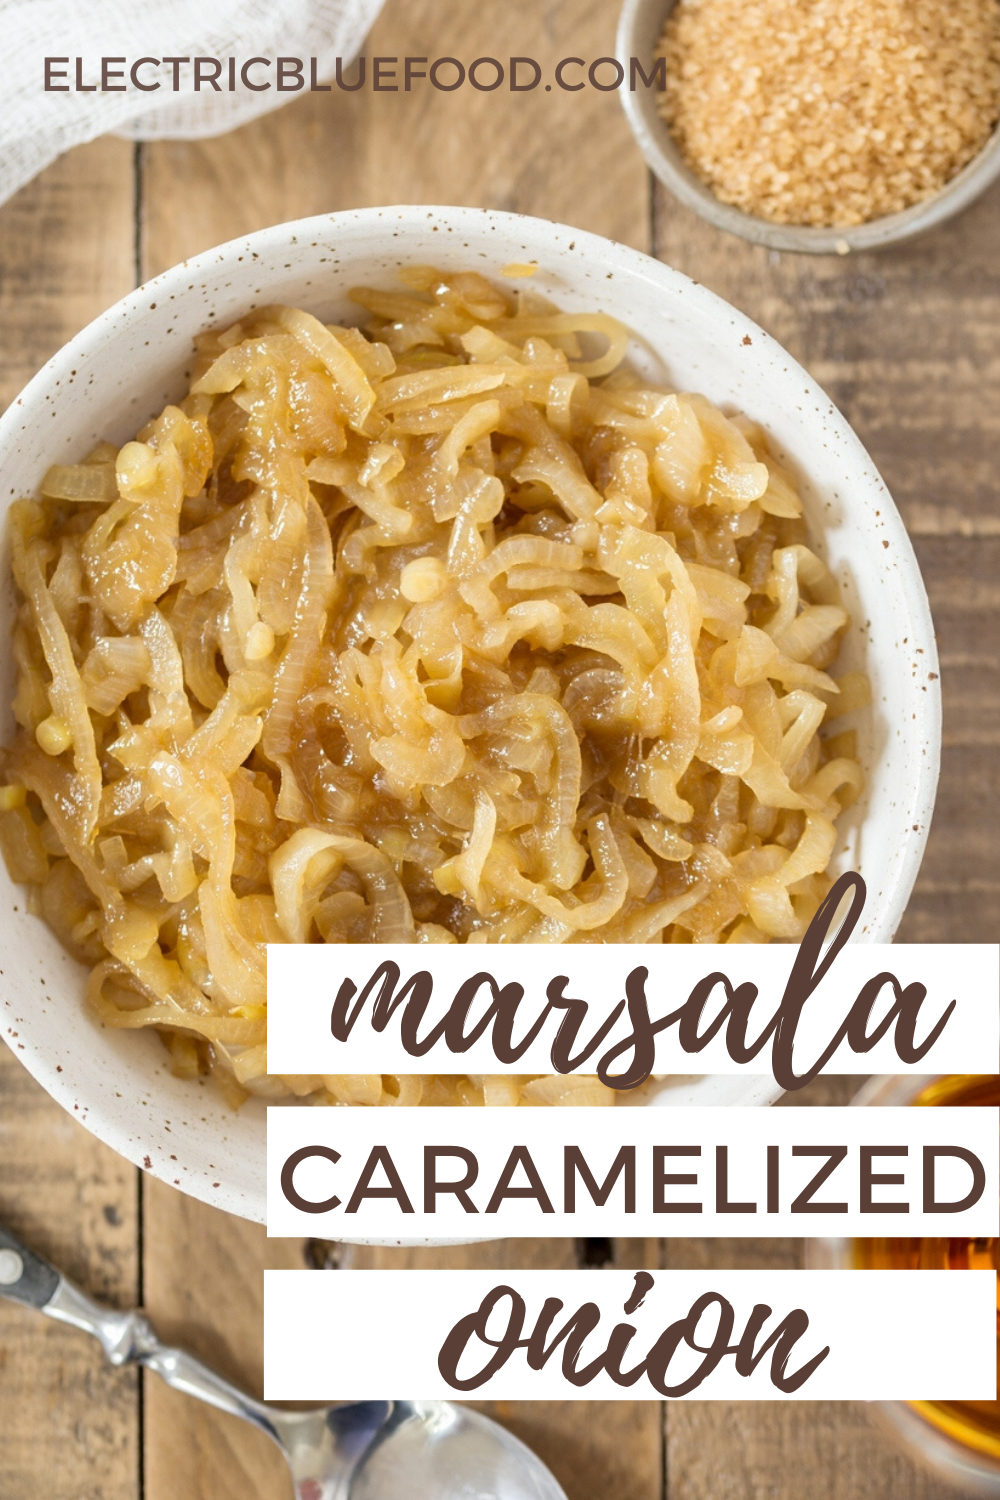 Add a hint of onion to your burger with this marsala caramelized onion relish! Marsala wine gives caramelized onions a lovely flavour depth that will make you love every spoonful. This may become your favourite secret ingredient for burgers that are always delicious.